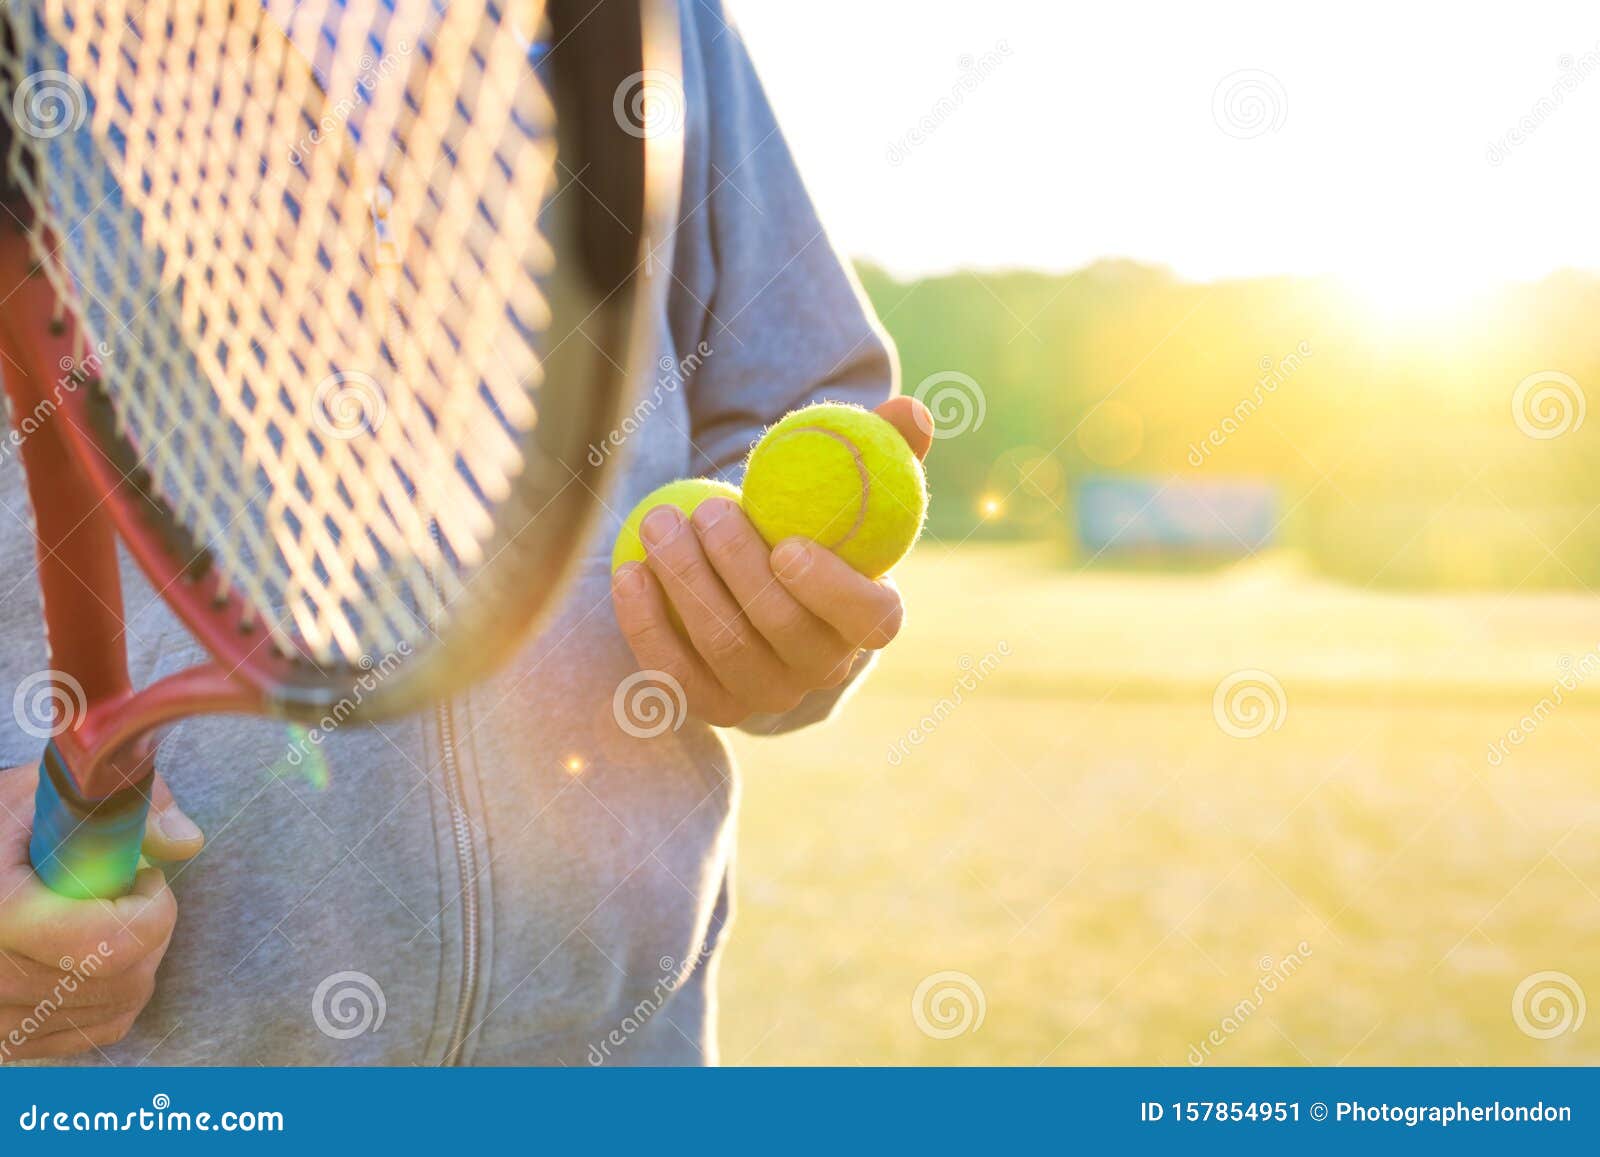 man holding tenis racket and ball at court on sunny day